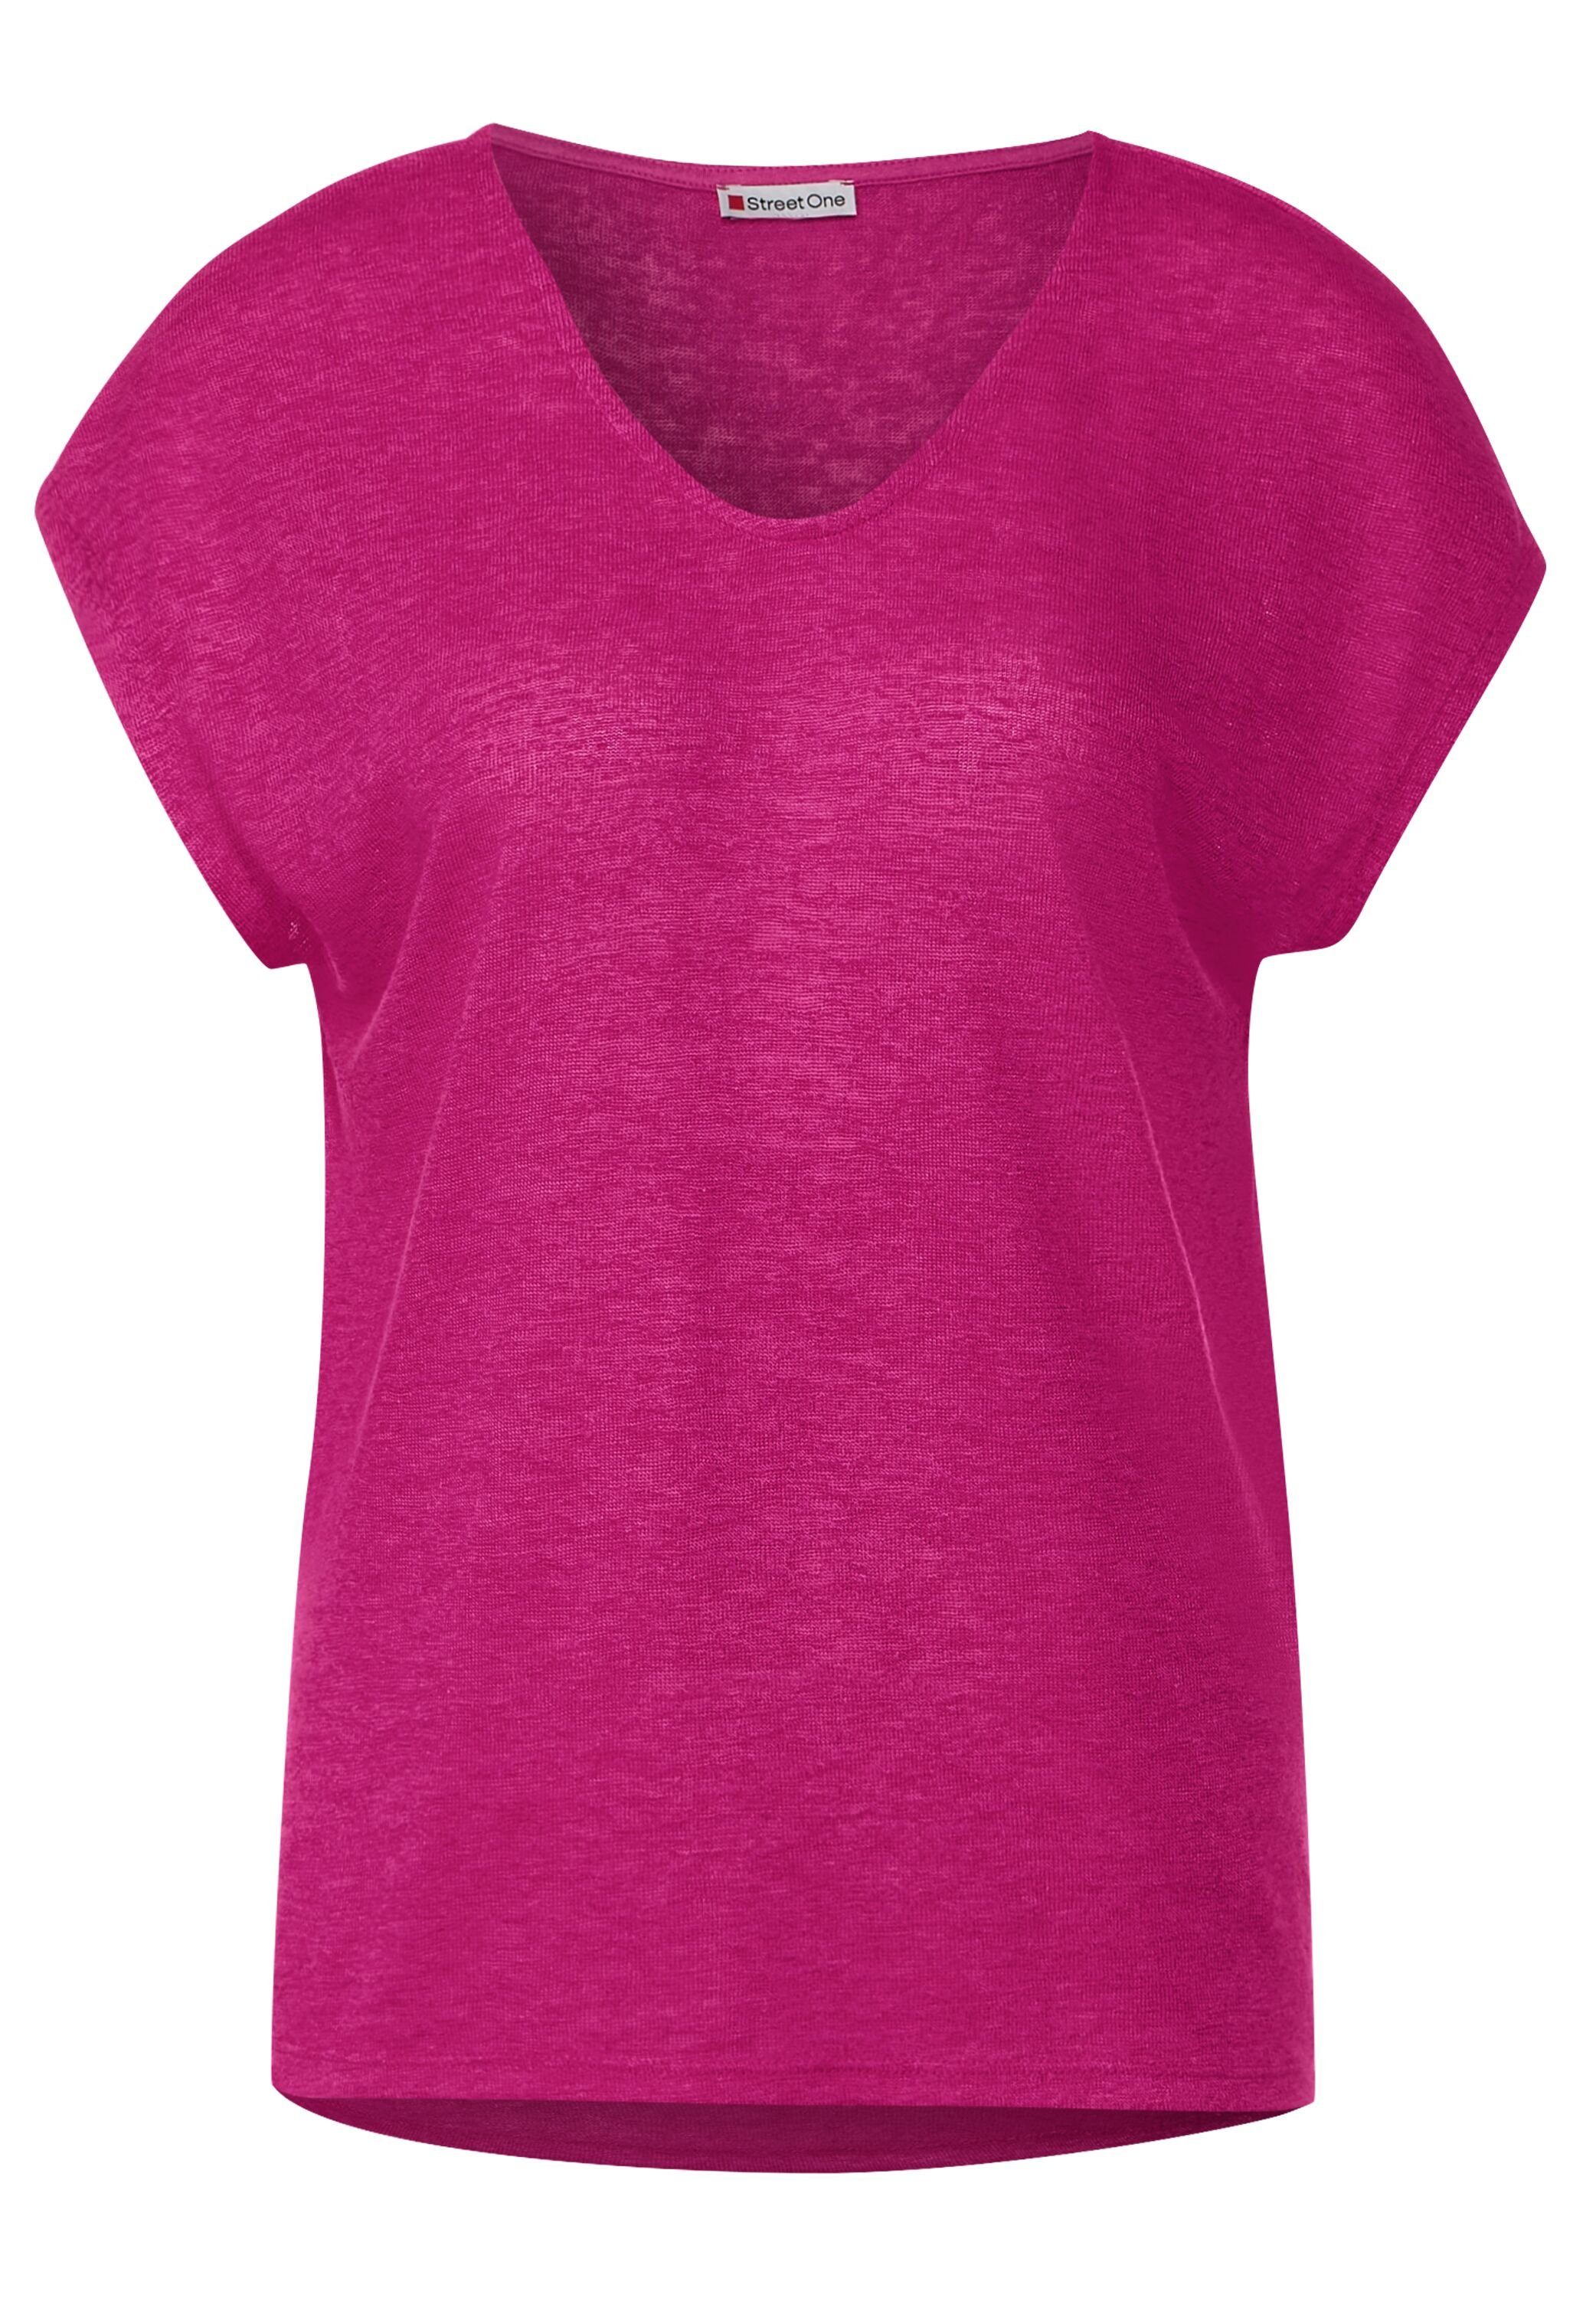 in oasis pink STREET Unifarbe ONE V-Shirt